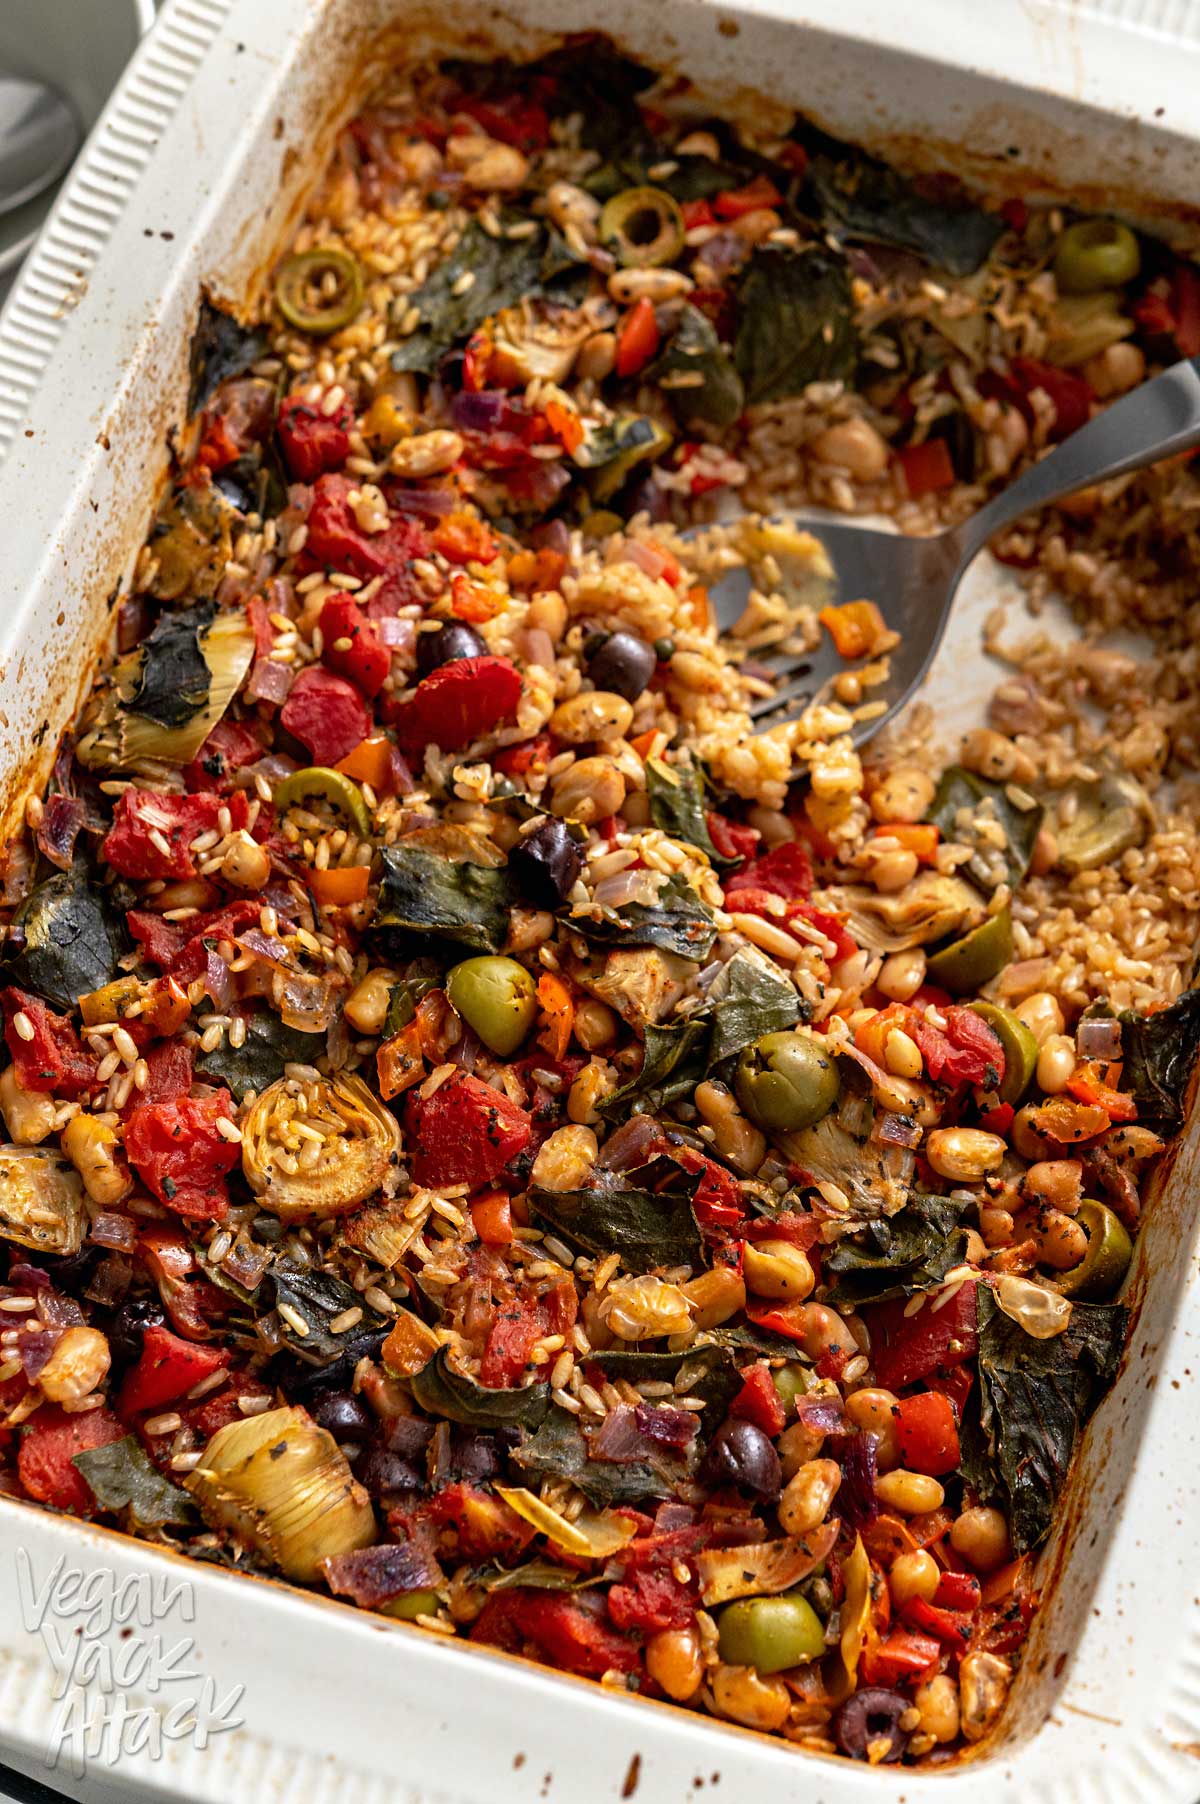 Close up of Large casserole dish containing veggie-filled rice bake on a marble table